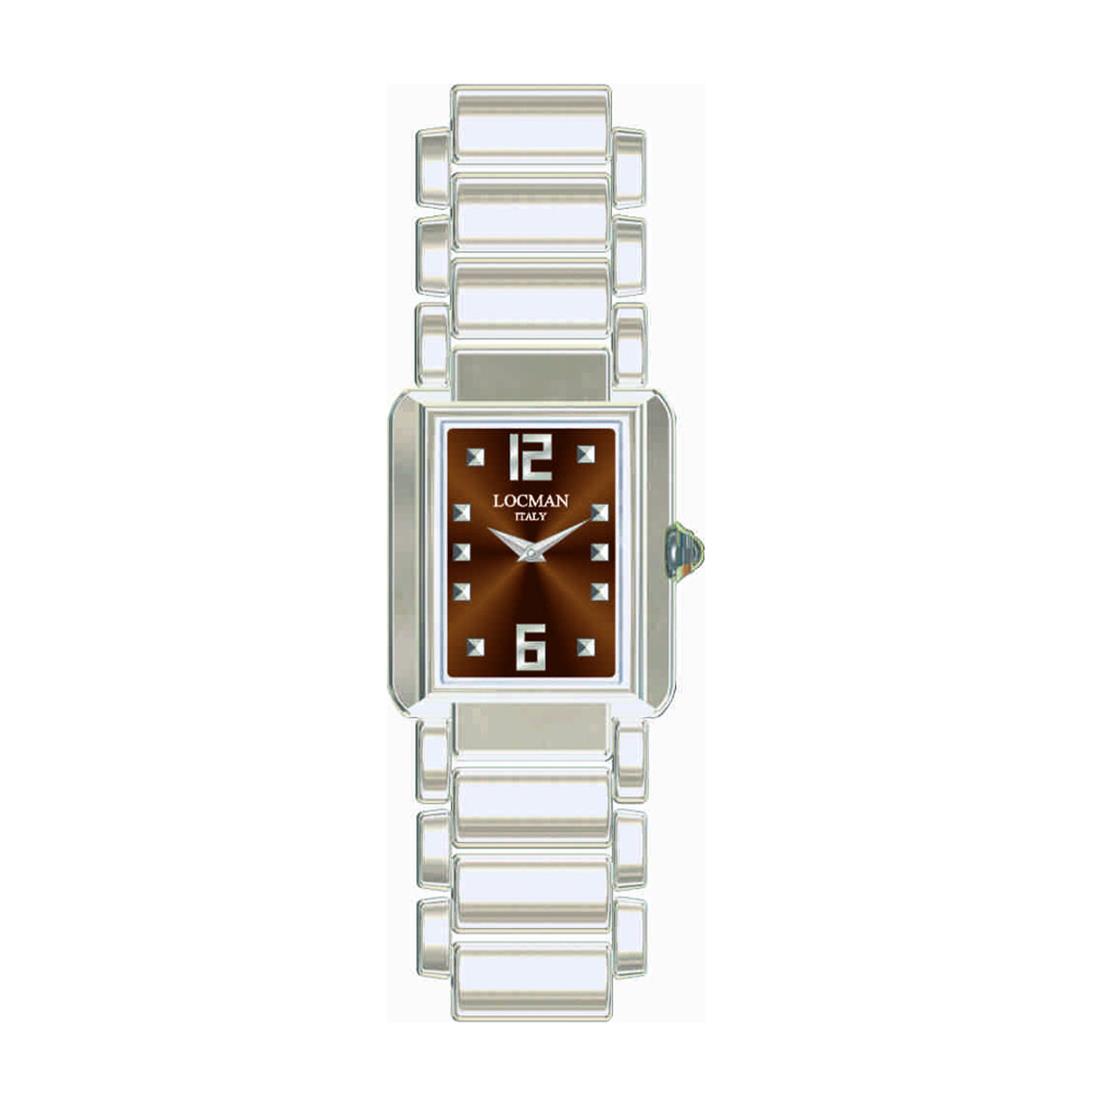 Woman's watch with 25 mm case - LOCMAN